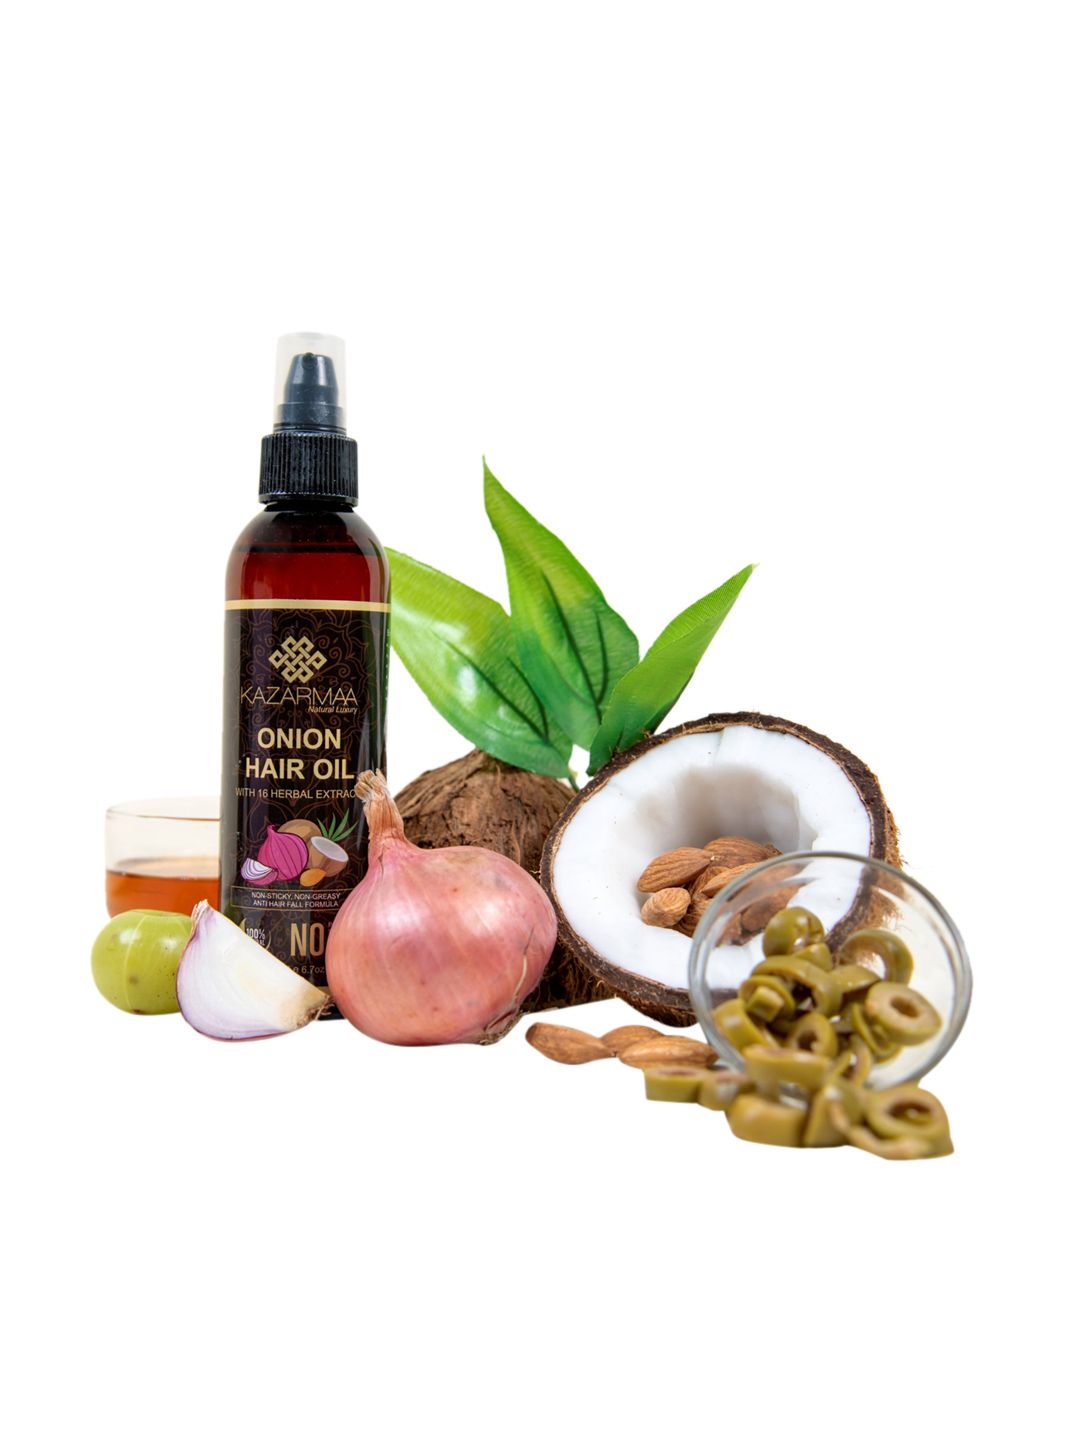 KAZARMAA Onion Hair Oil with 16 Herbal Extracts - 200 ml Price in India